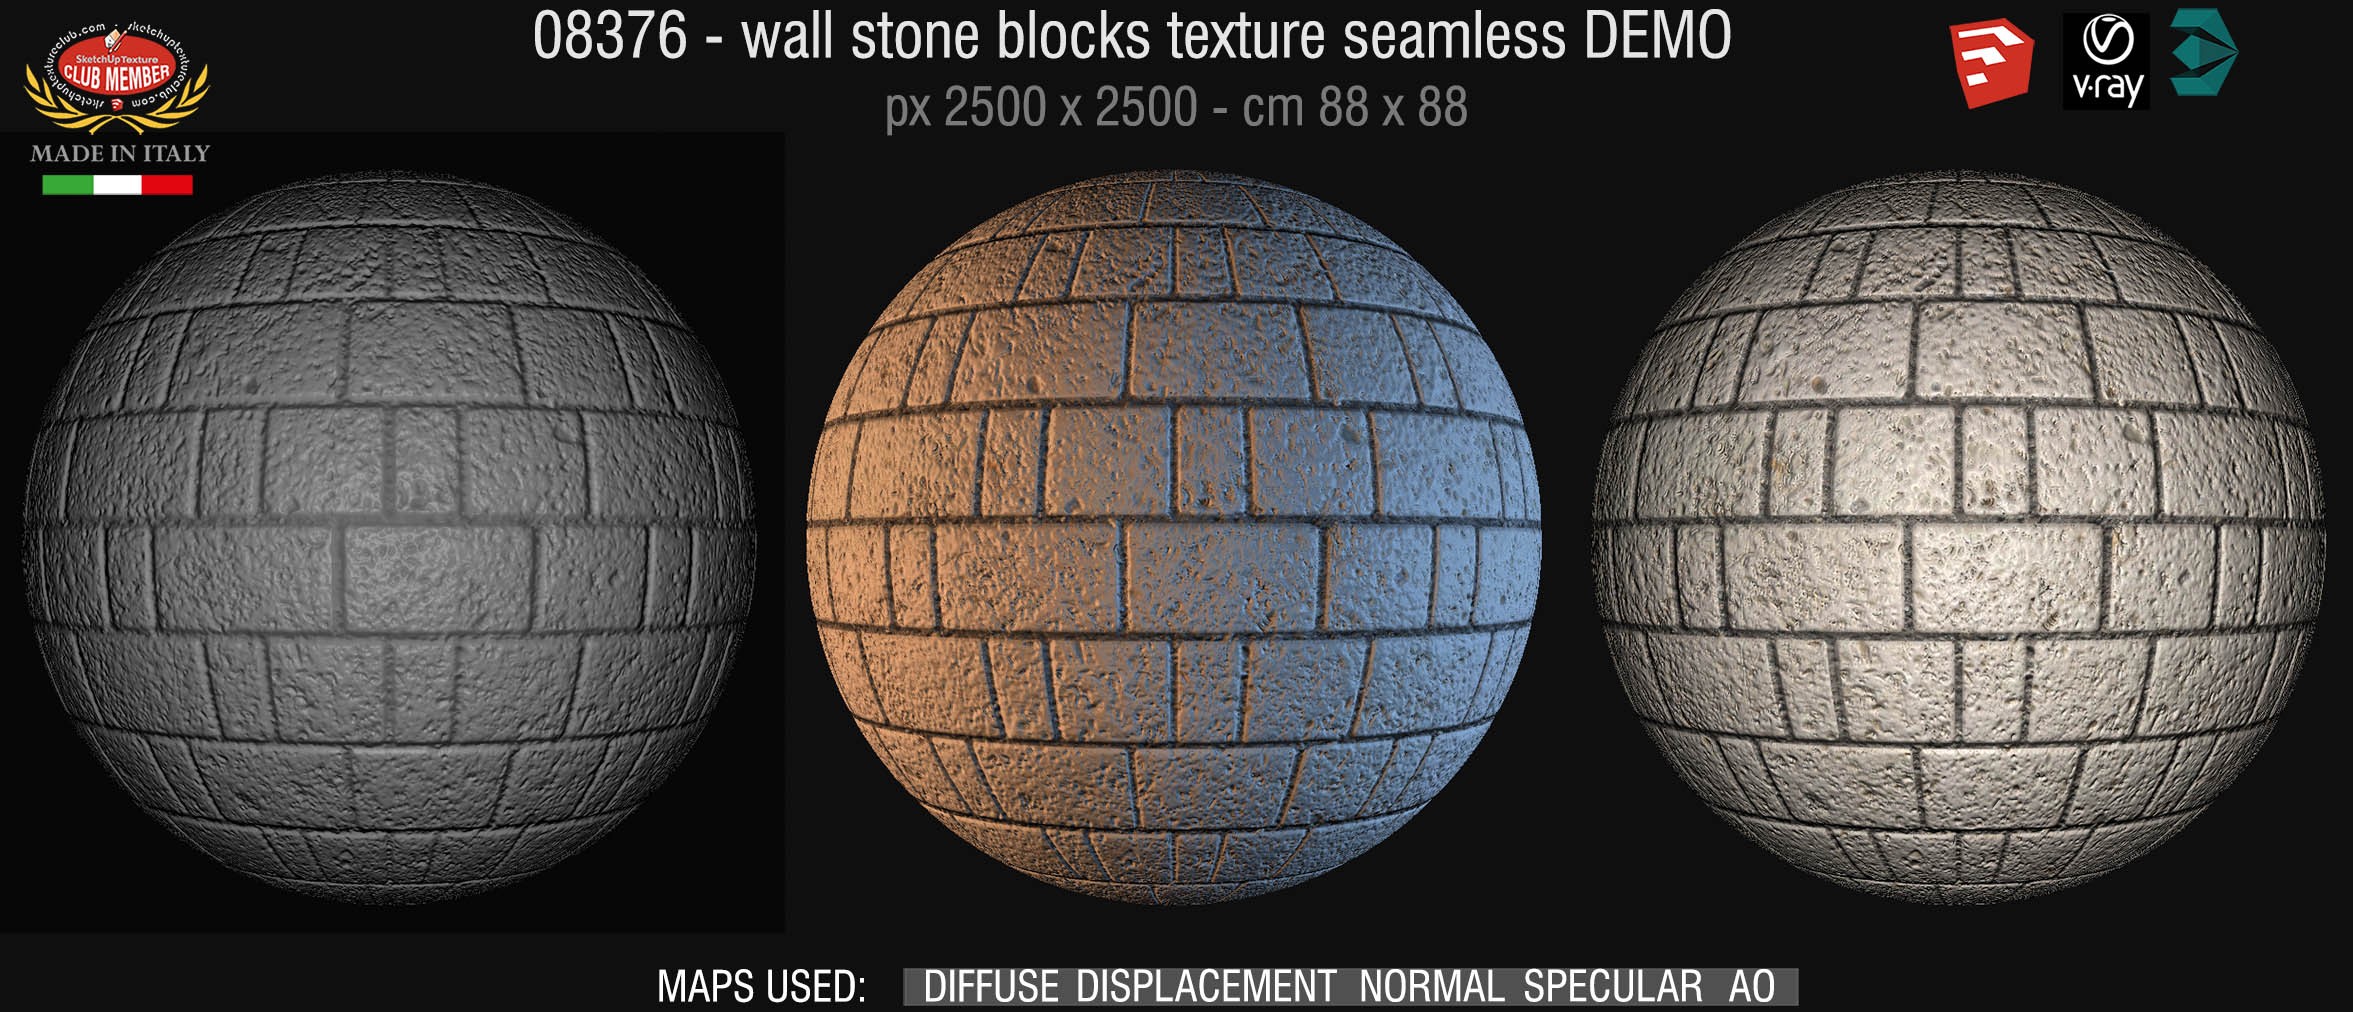 08376 HR Wall stone with regular blocks texture + maps DEMO